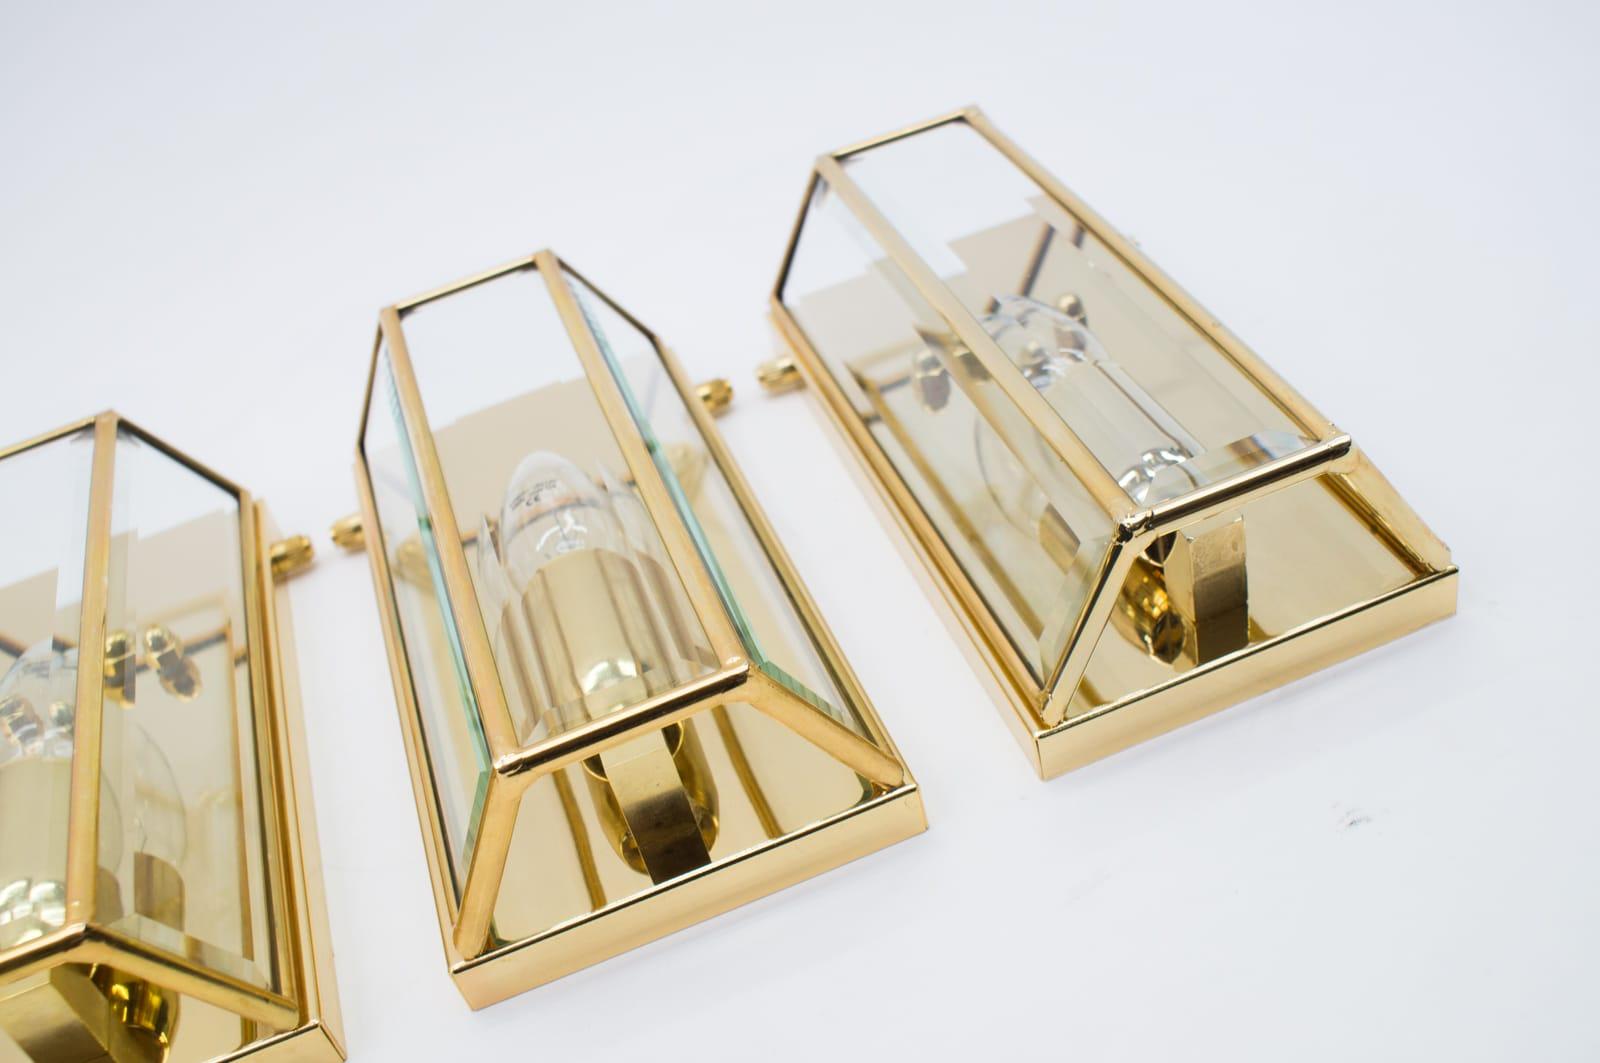 Late 20th Century Set of 4 Elegant Midcentury Brass and Cut Glass Wall Lamps by W. Müller Munich For Sale